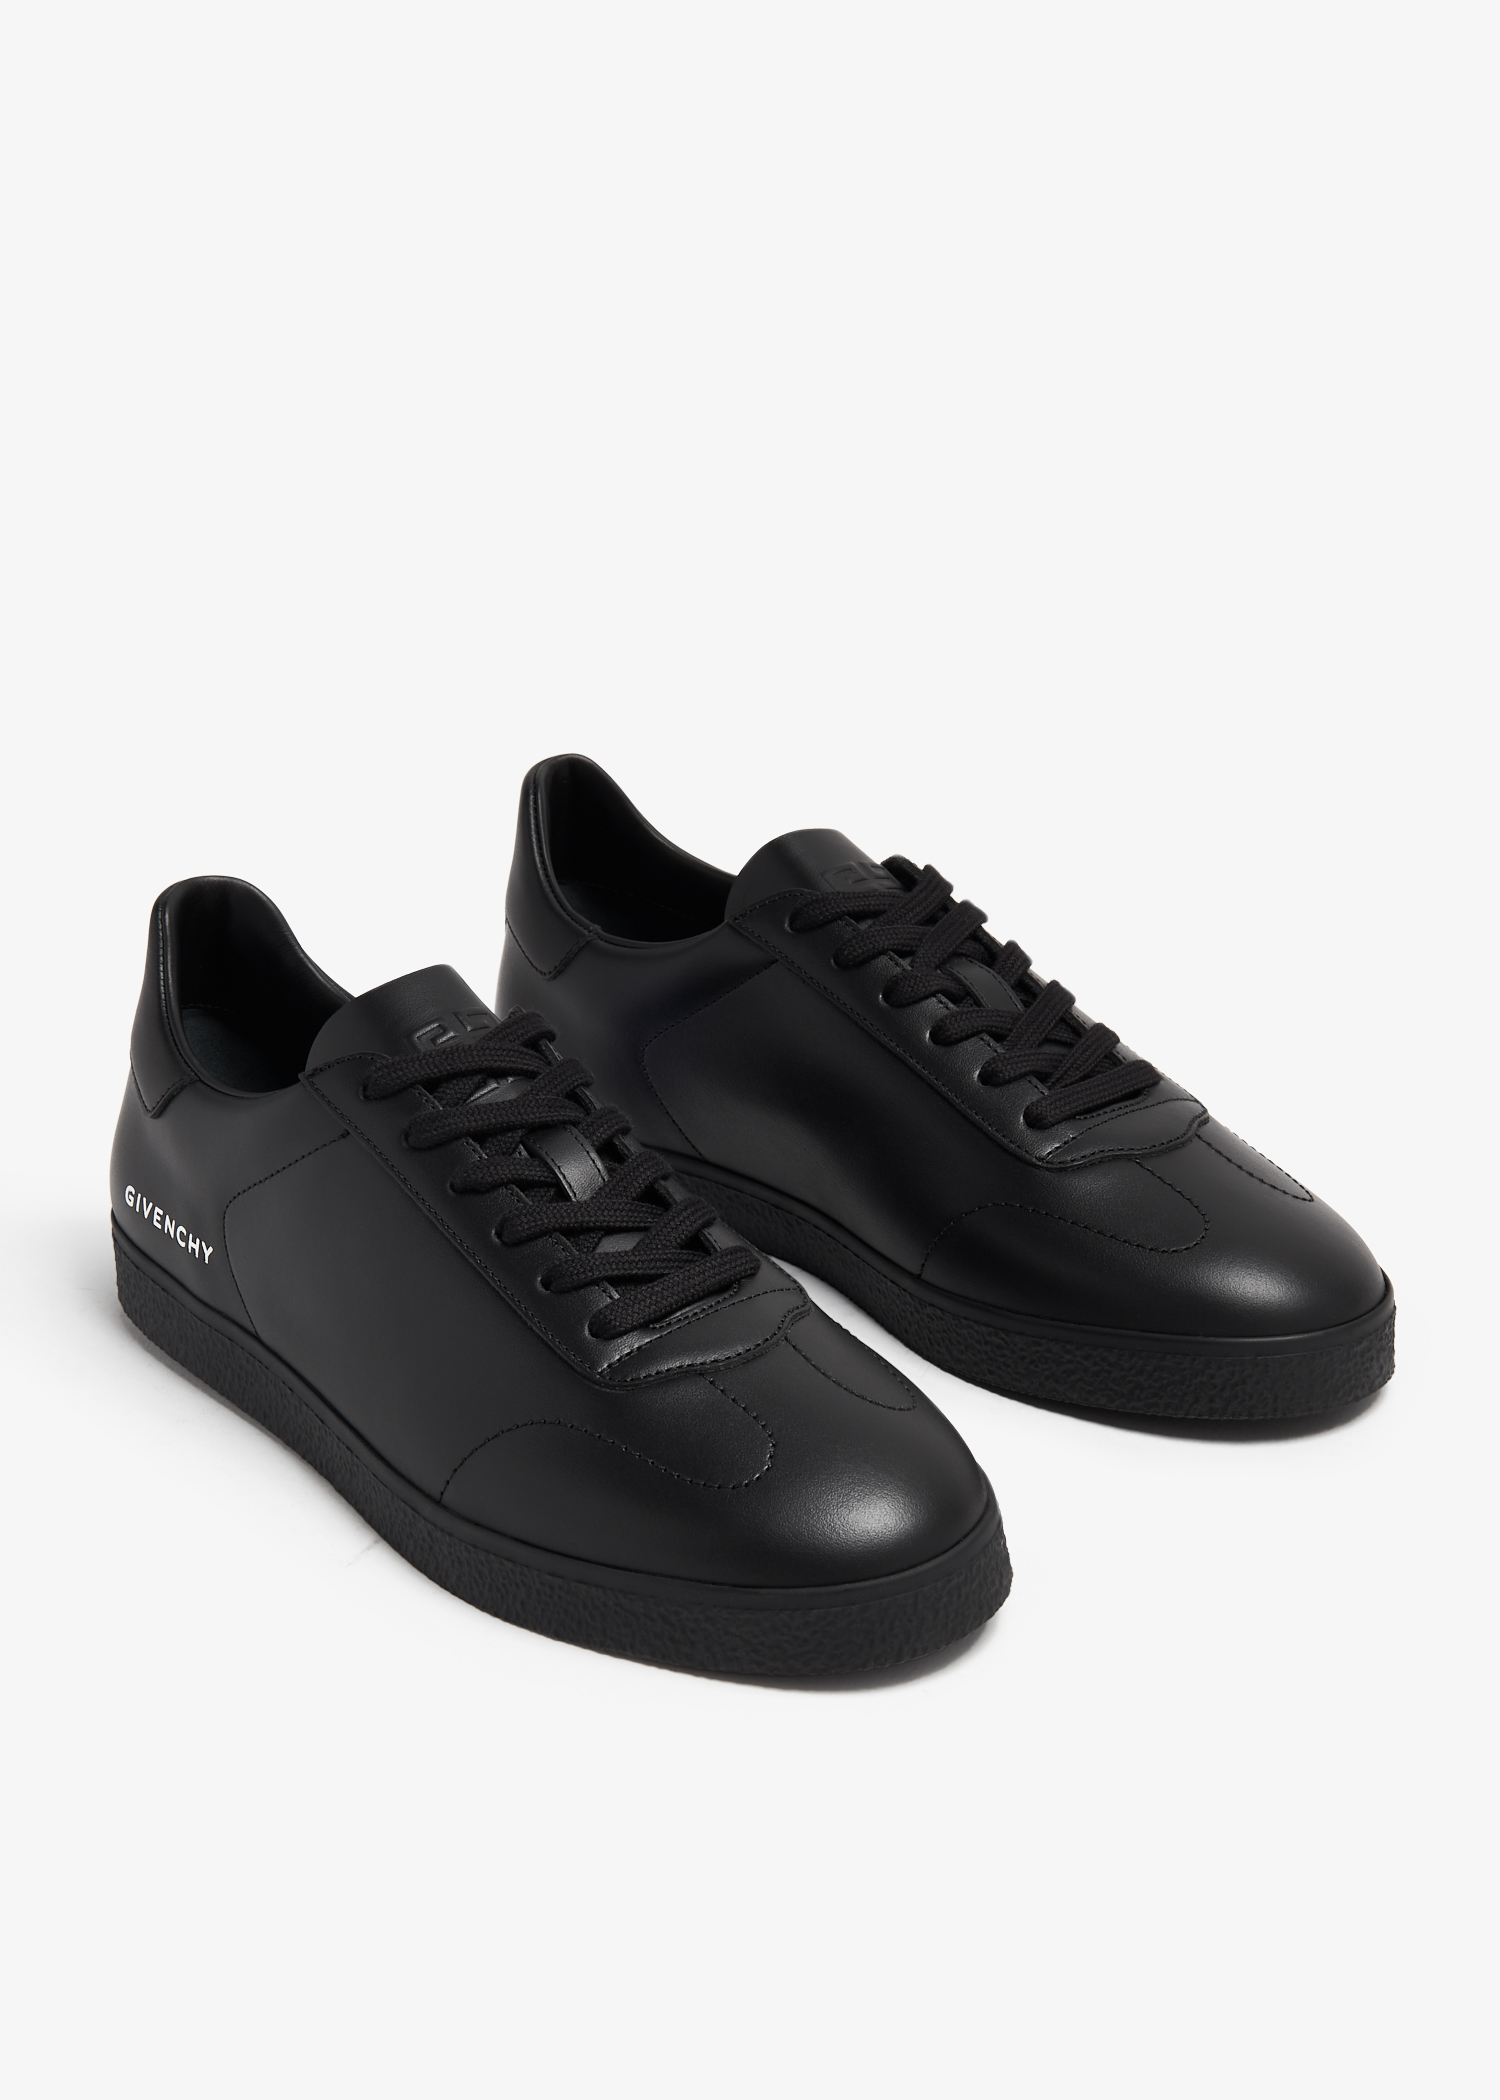 Le Style Boutique - GIVENCHY SNEAKERS IN STORE AND ONLINE // LESTYLE  BOUTIQUE | Facebook